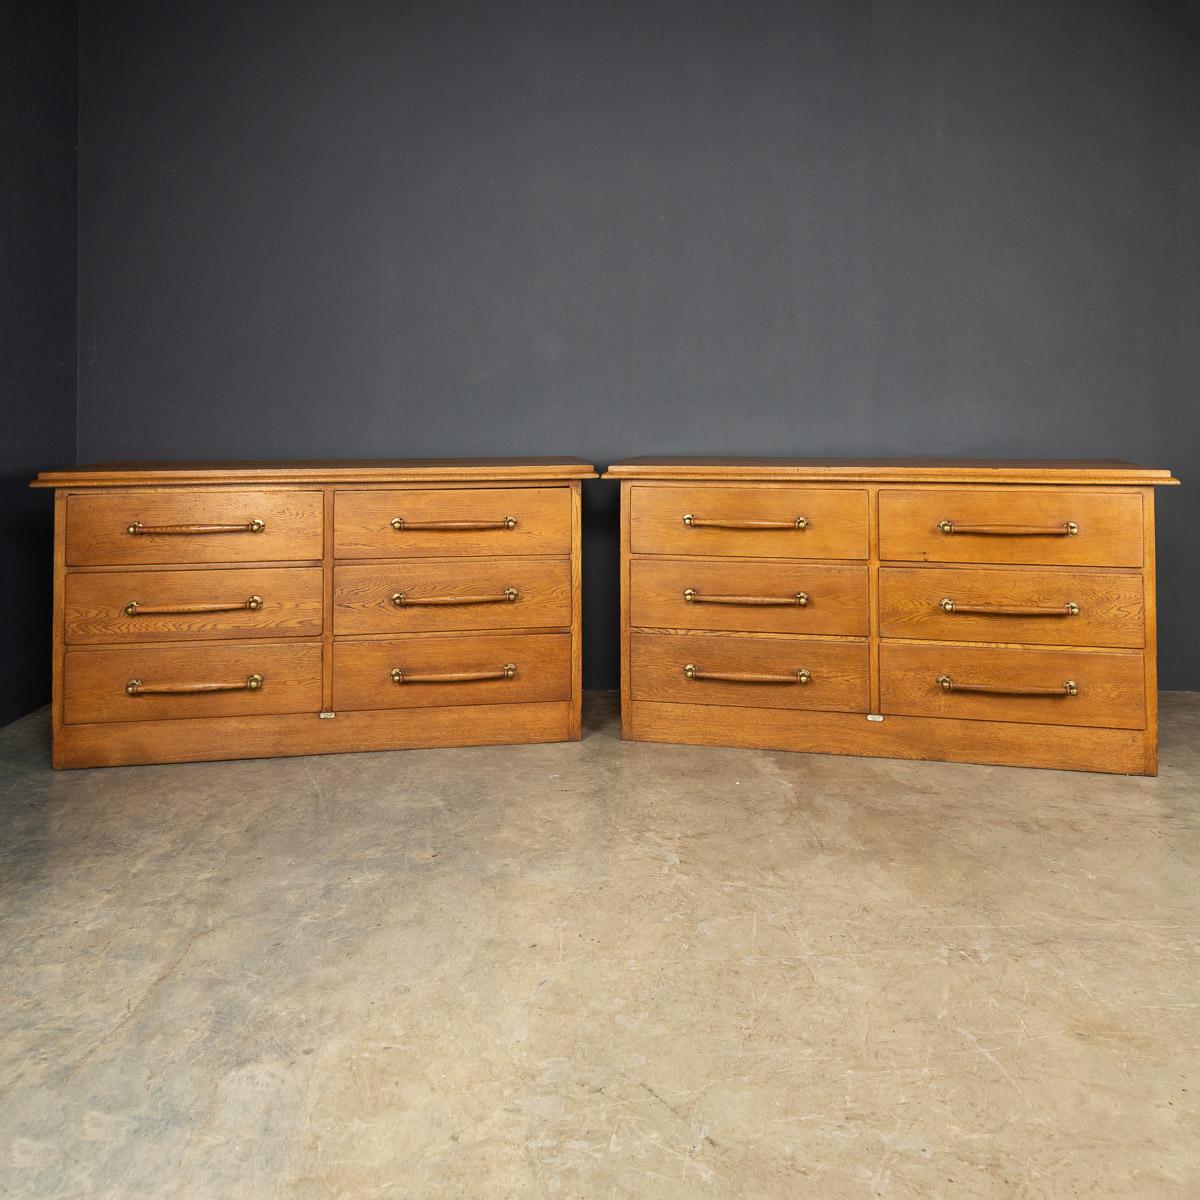 Antique early-20th century English pair of hand crafted mahogany haberdashery, this units would have been undoubtedly used in a prestigious gentleman's clothing store in the fashionable 1900's. Each piece has six retractable drawers with original